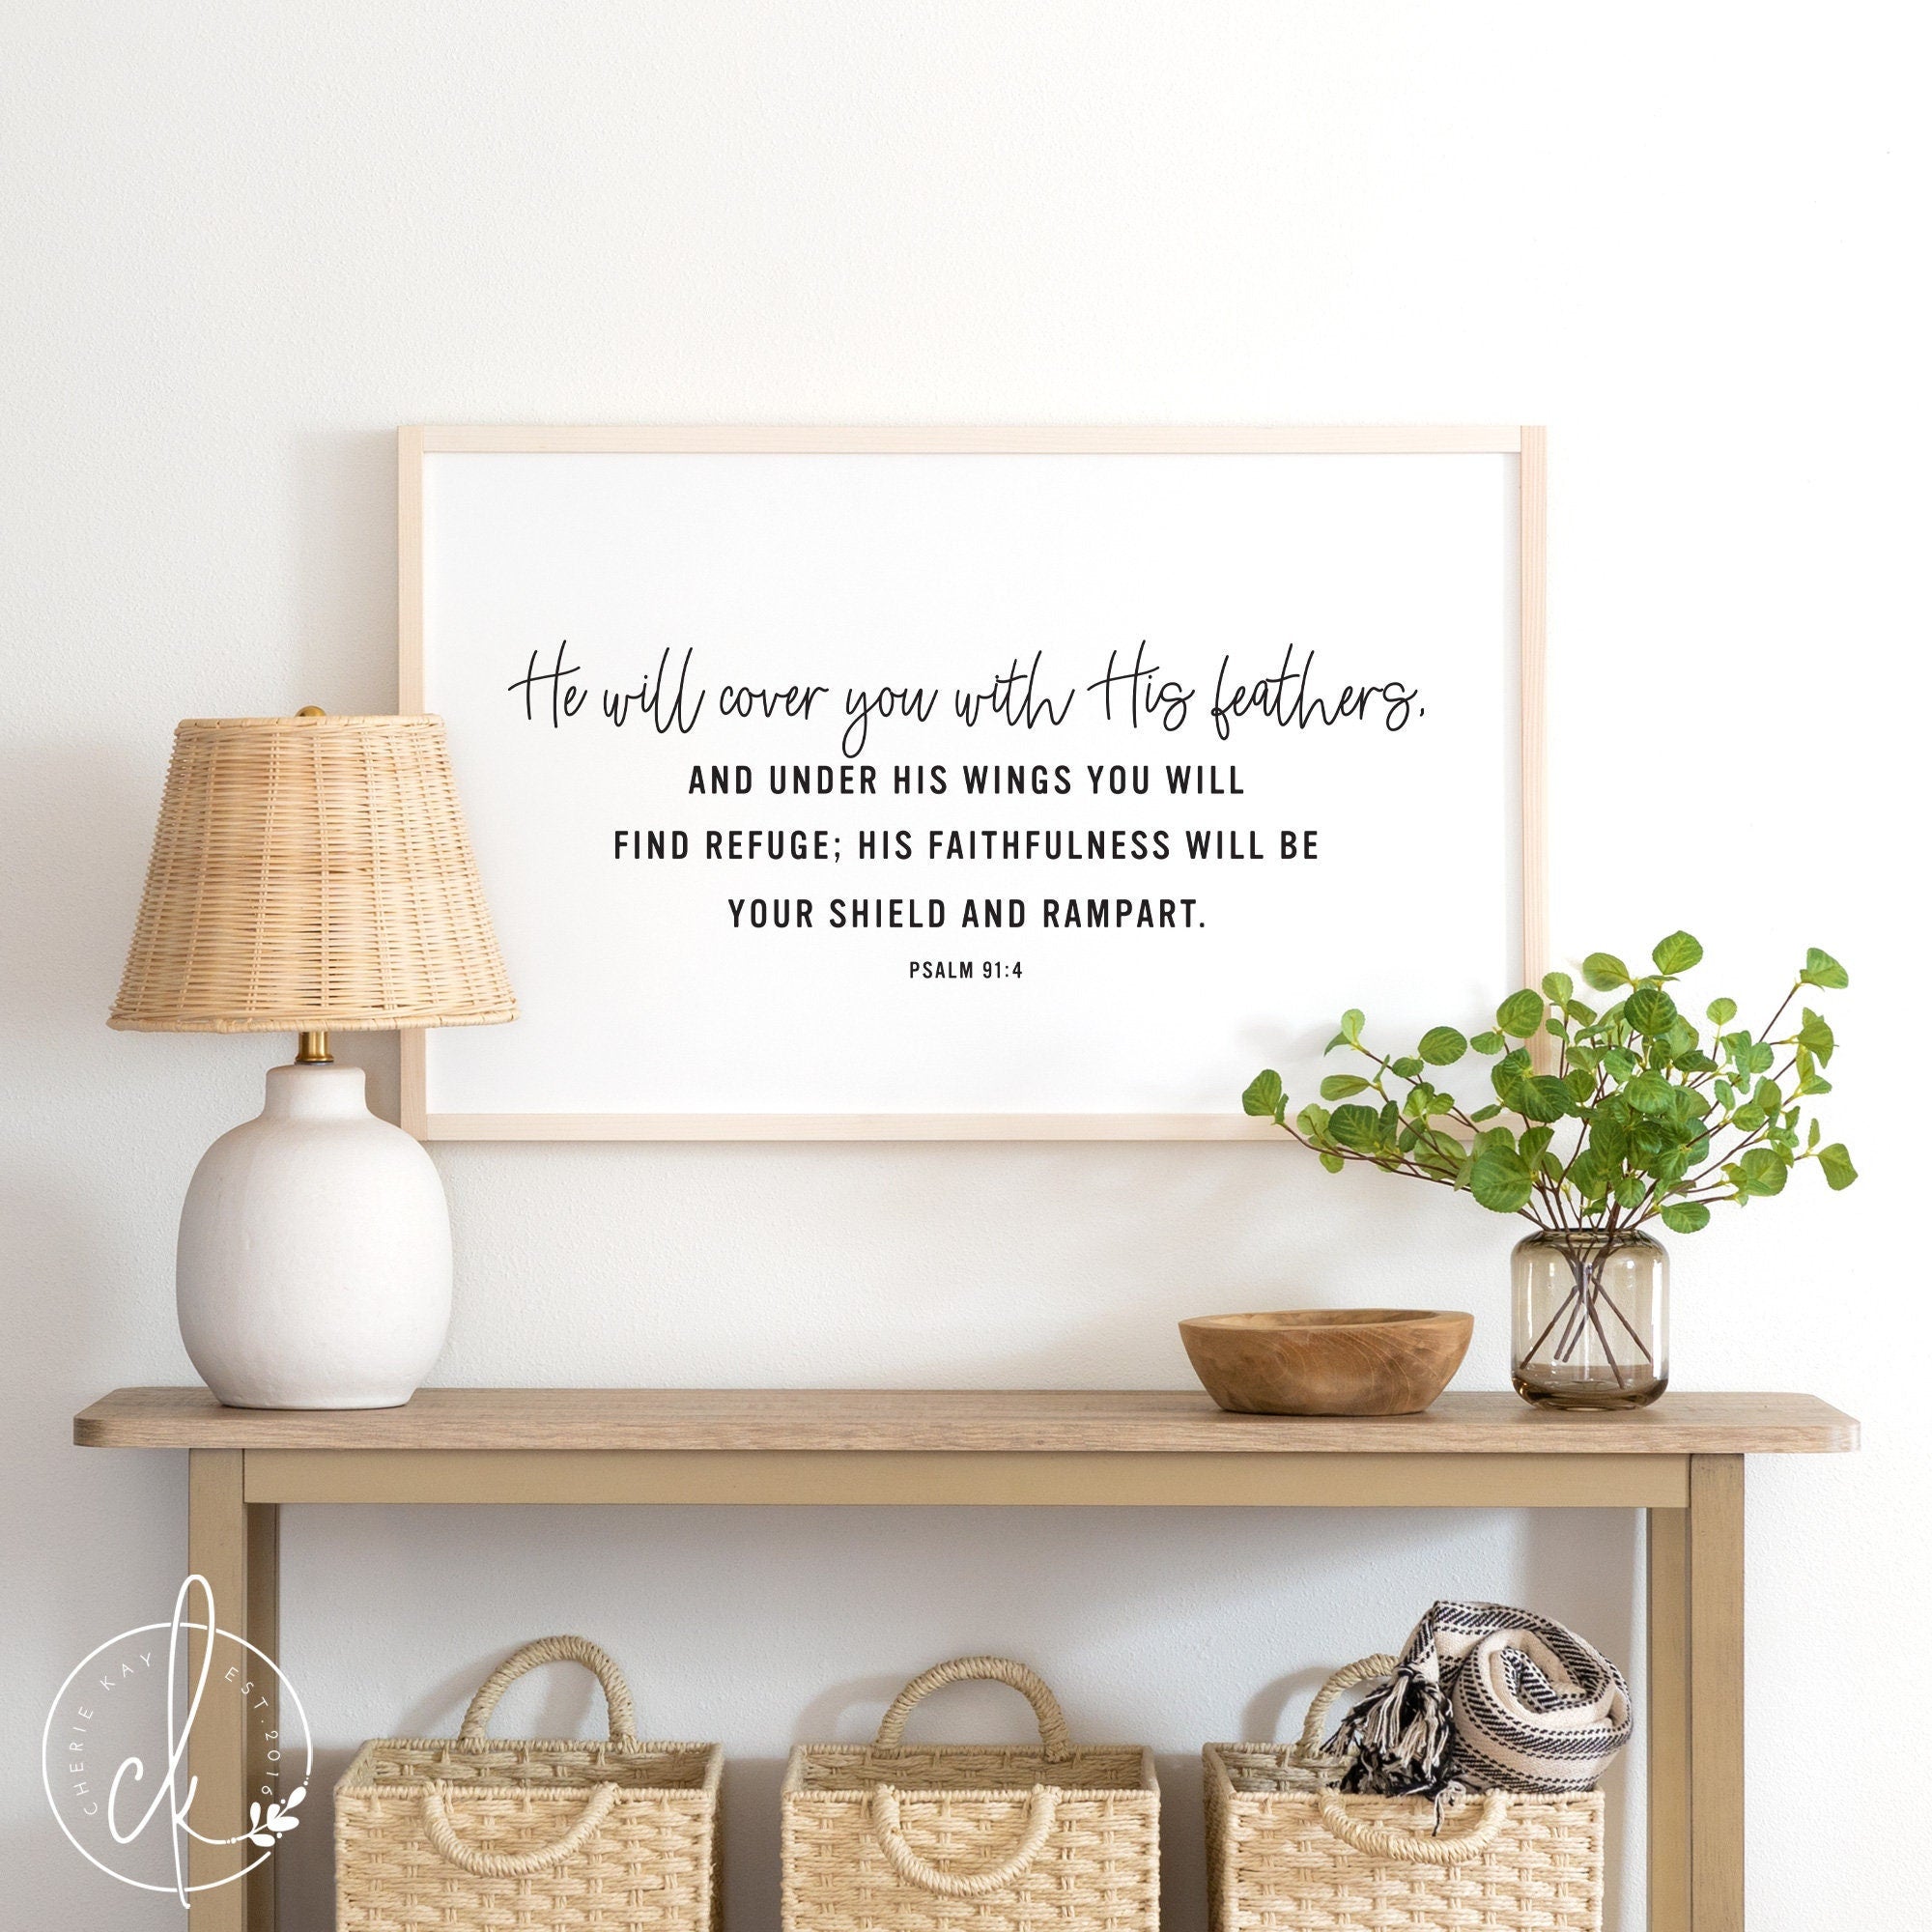 scripture wall art | He will cover you with His feathers | wood signs | psalm 91:4 | bible verse wall decor | christian wall art | D2